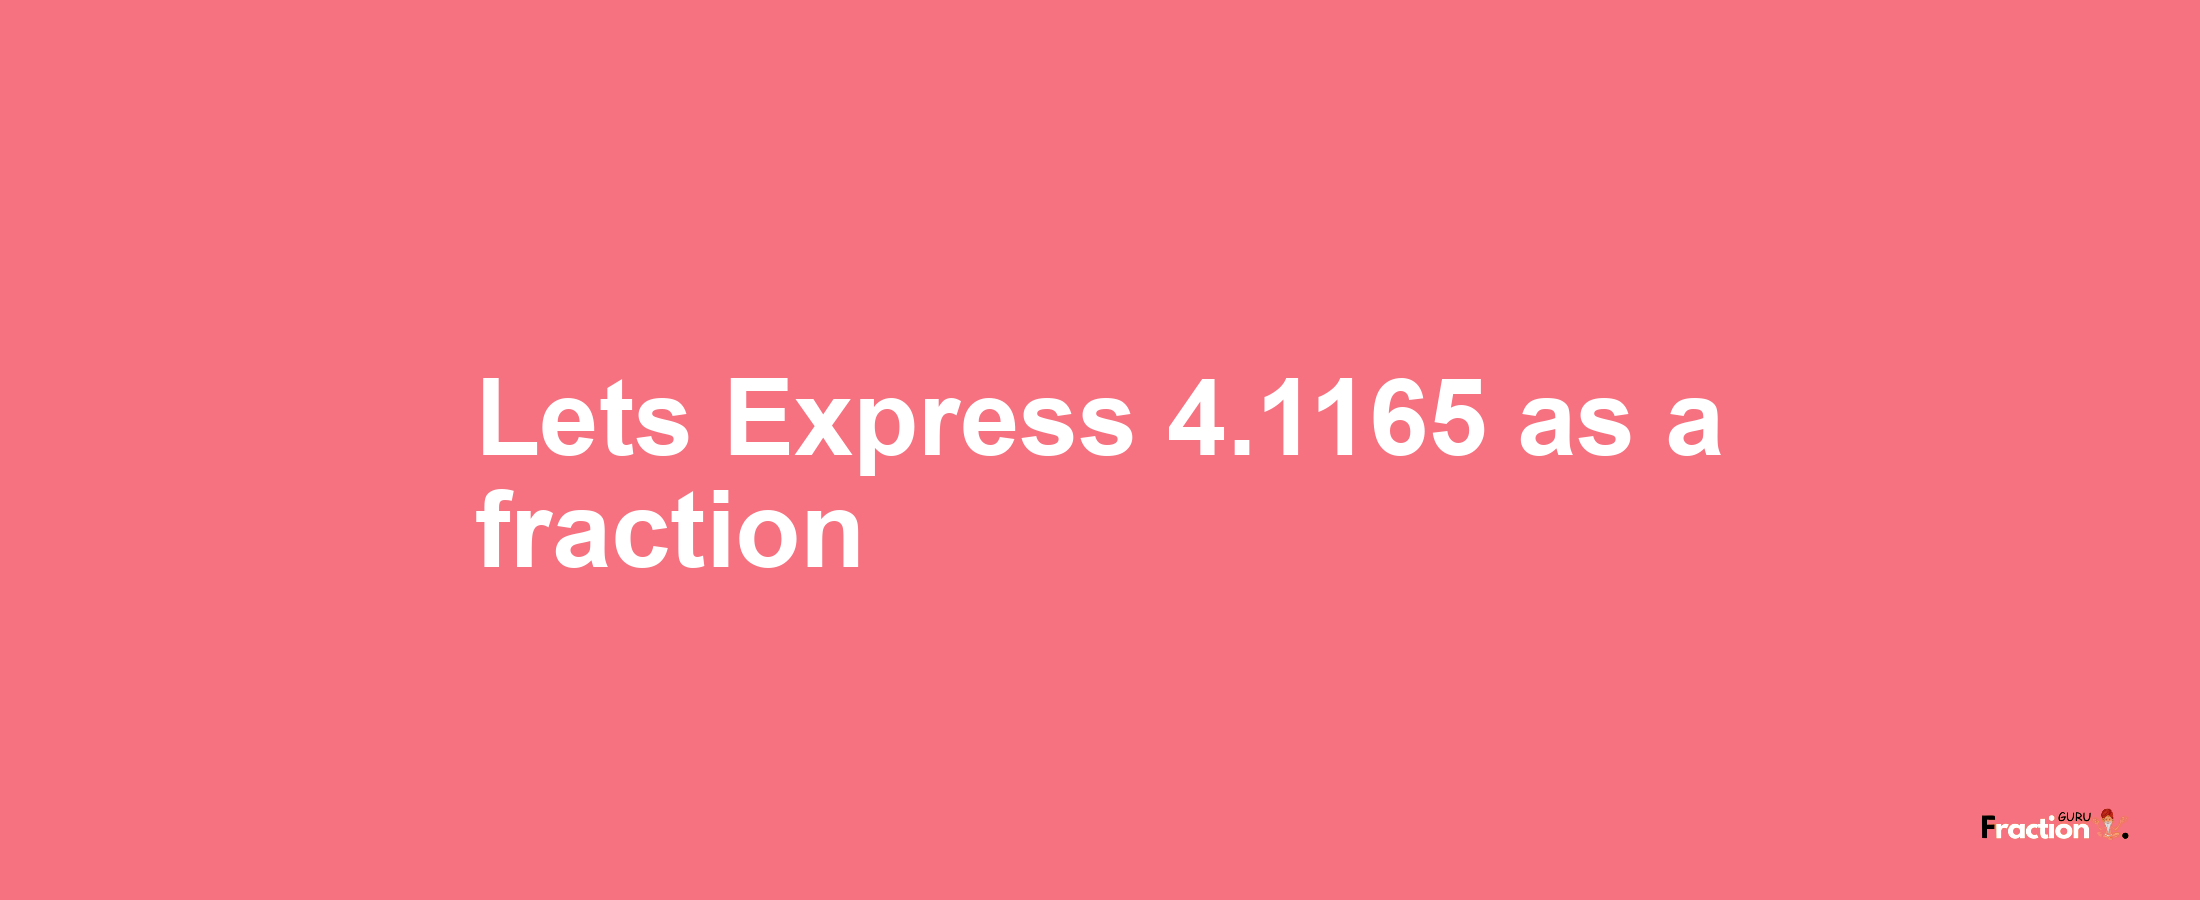 Lets Express 4.1165 as afraction